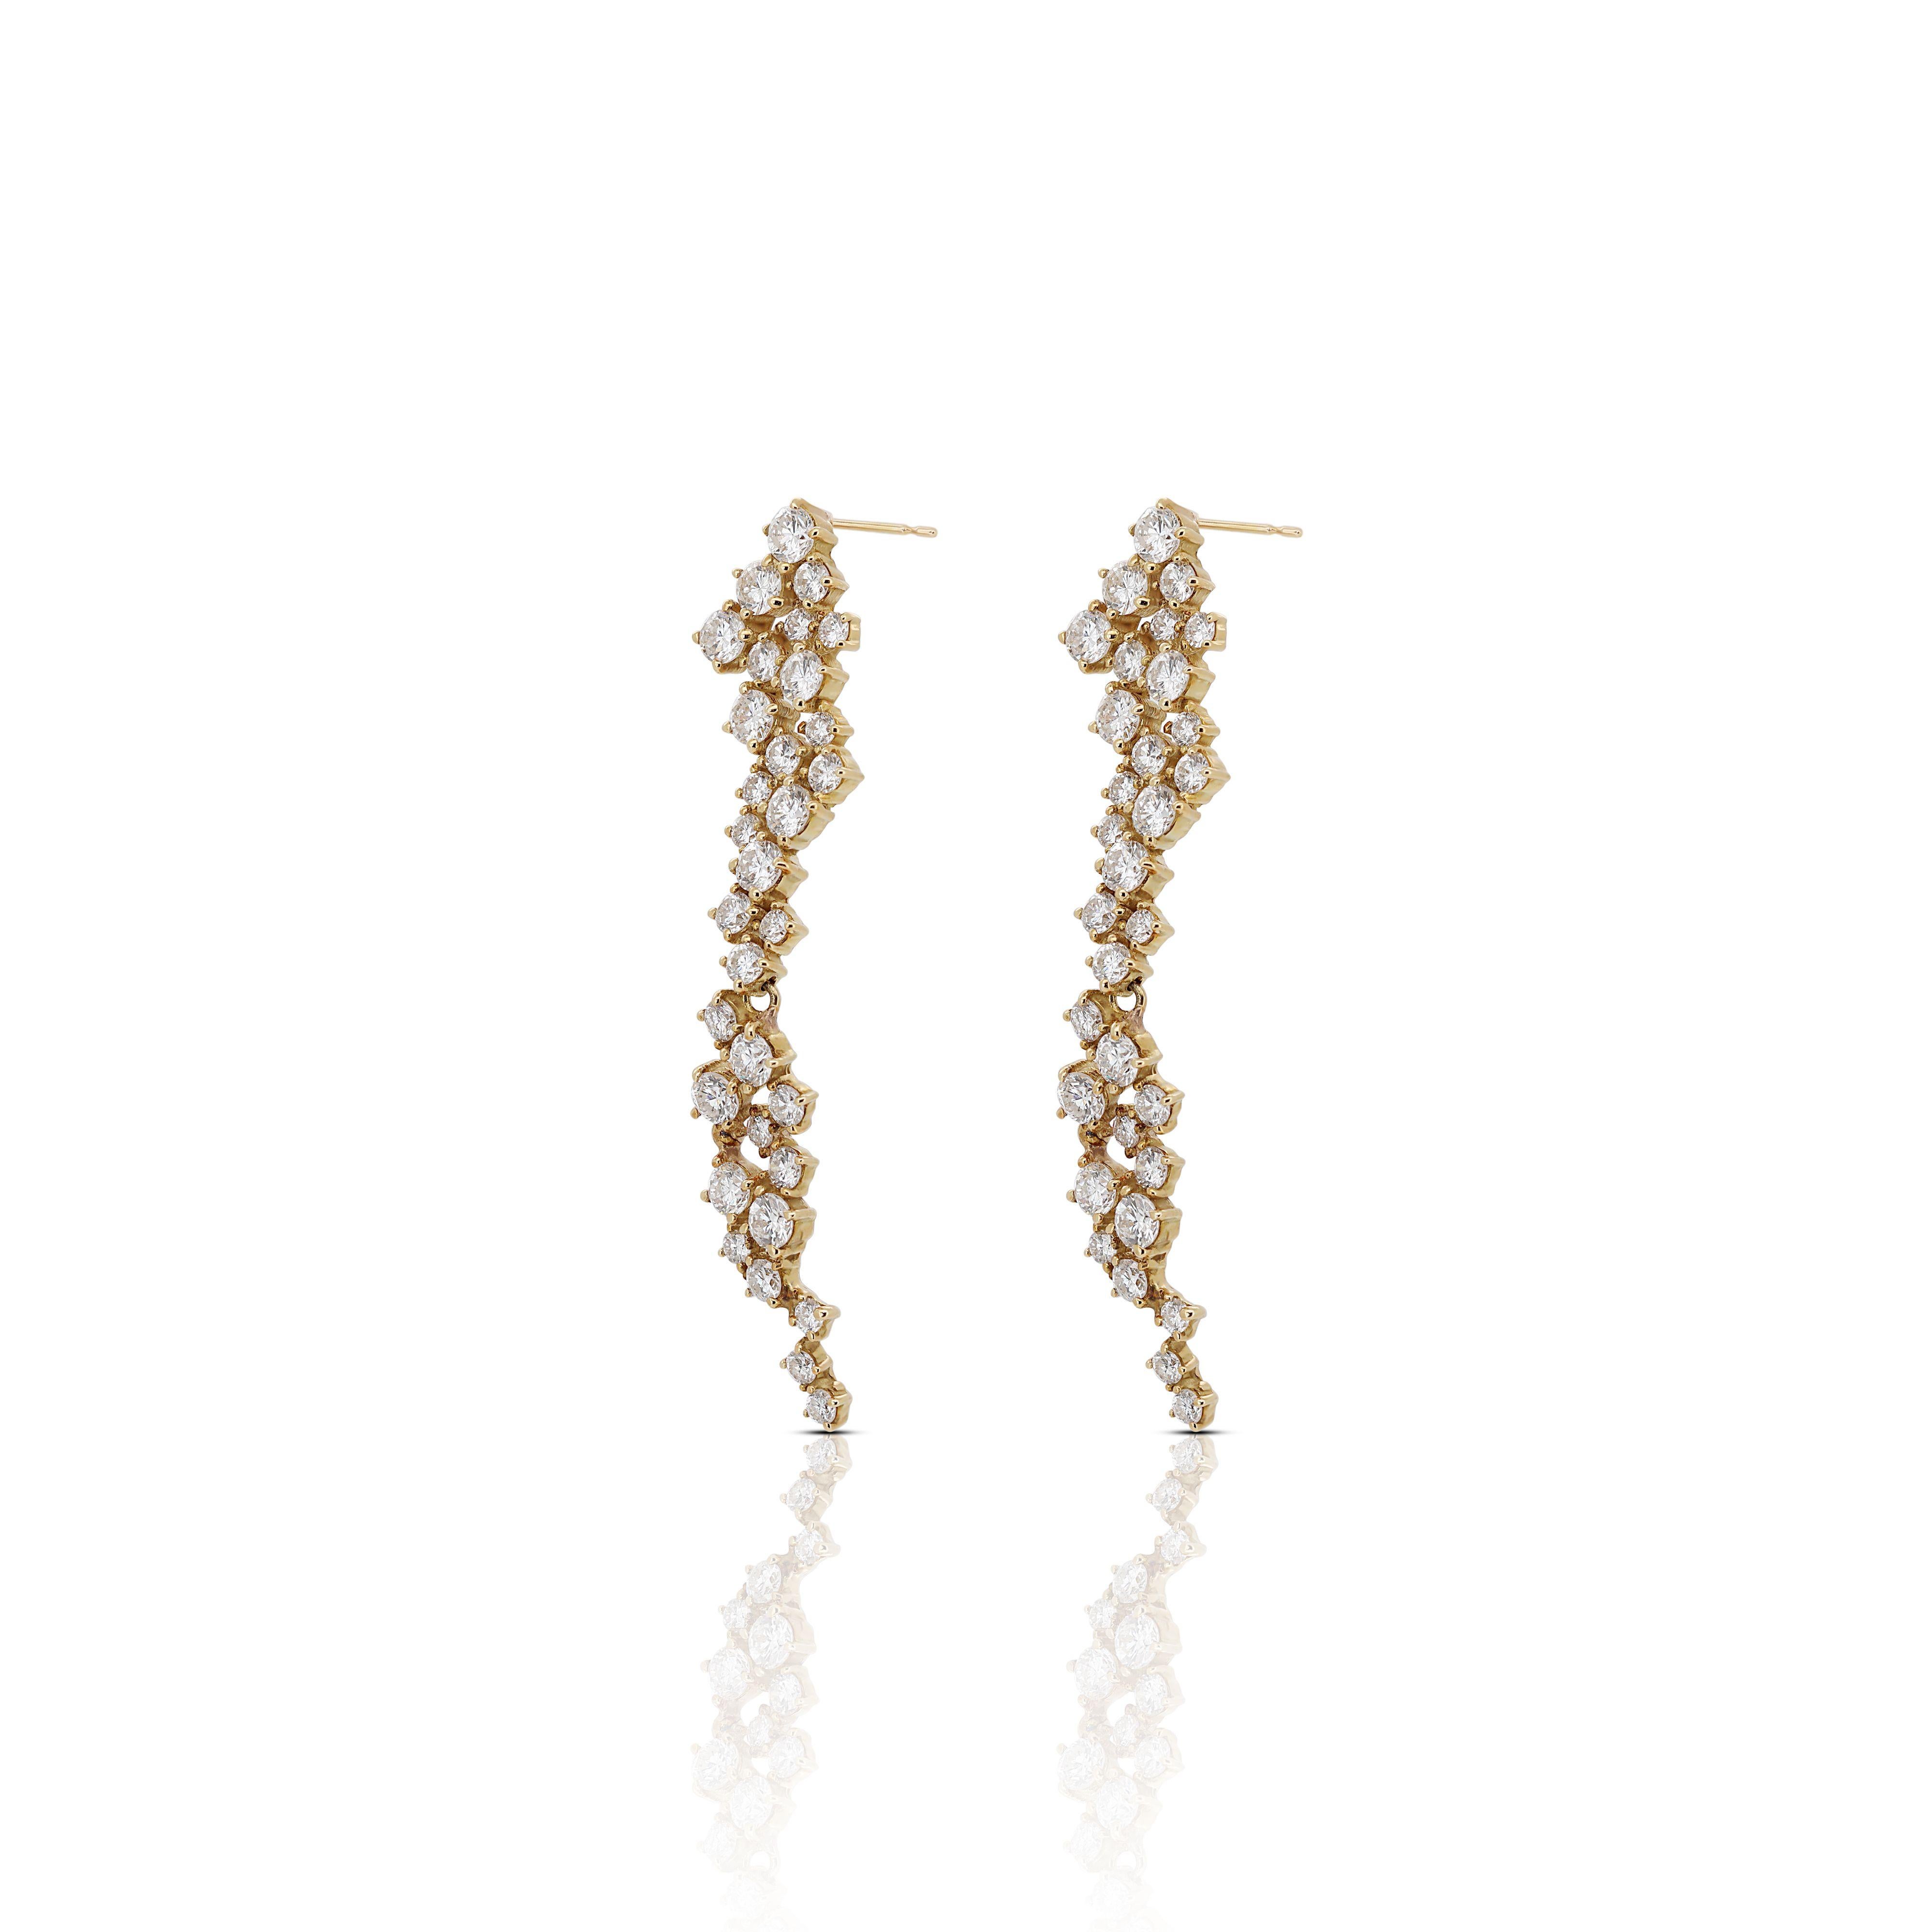 Elegant 18k Yellow Gold Drop Earrings with 1.60 Natural Round Diamonds, NGI Cert In New Condition For Sale In רמת גן, IL